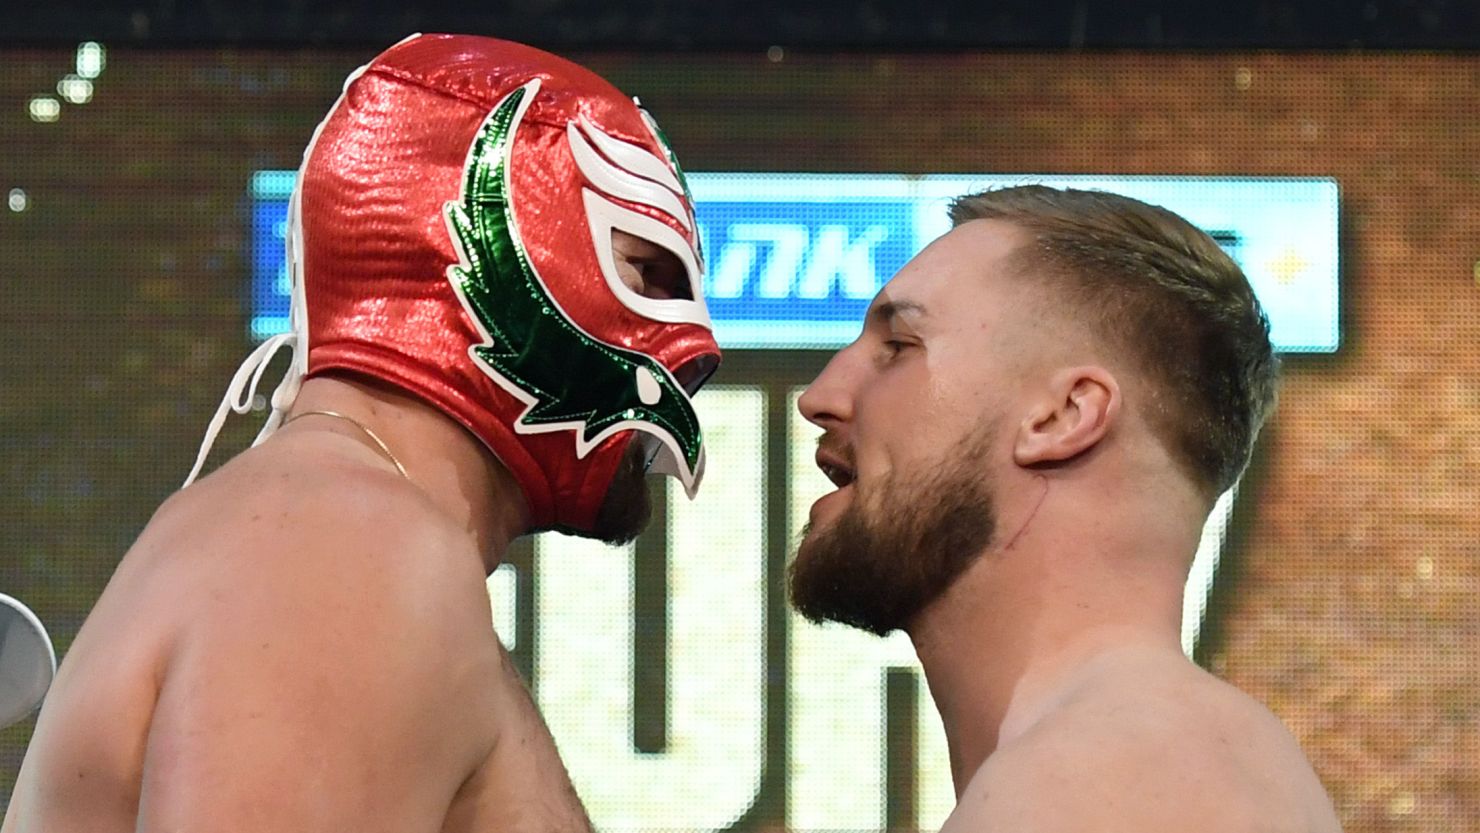 Tyson Fury wore a luchador, or Mexican professional wrestler, mask to the Thursday weigh-in with Otto Wallin.